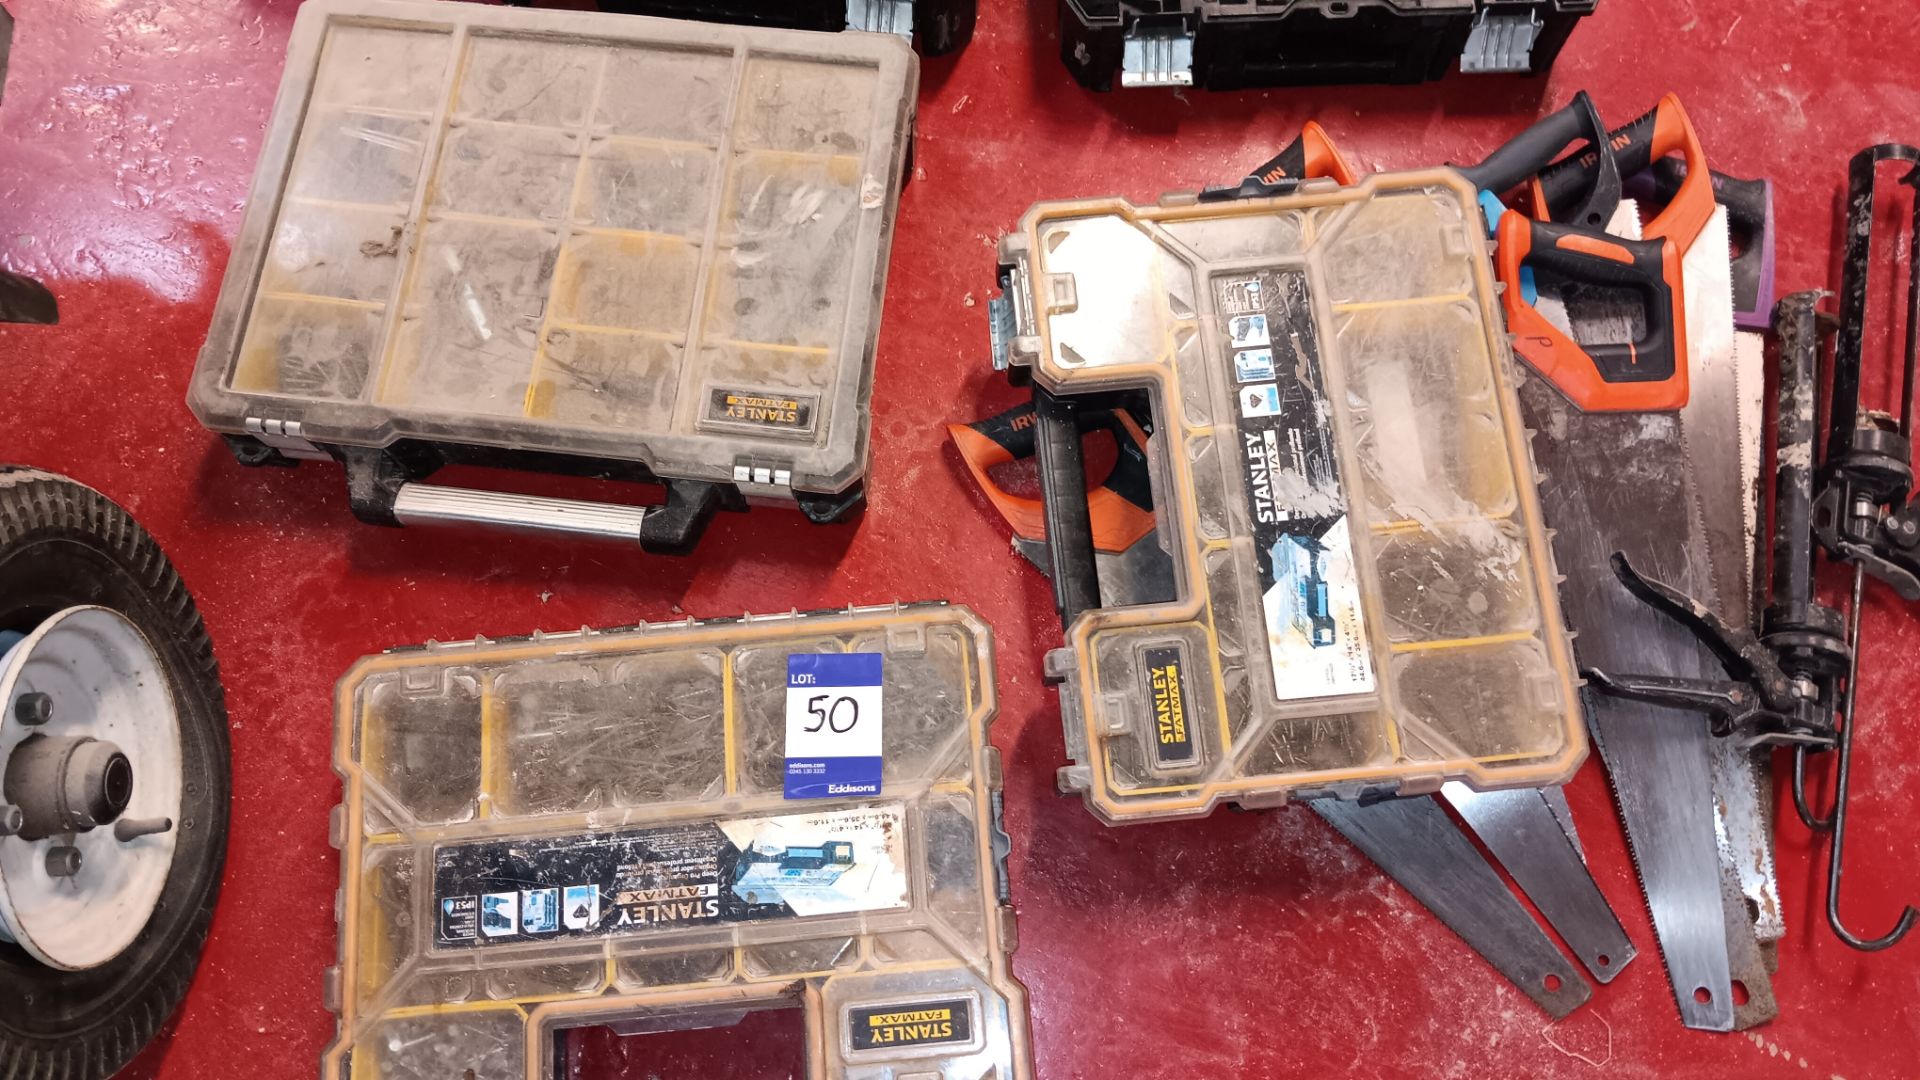 Assortment of Hand Tools and 3 x Stanley Fatmax To - Image 4 of 4